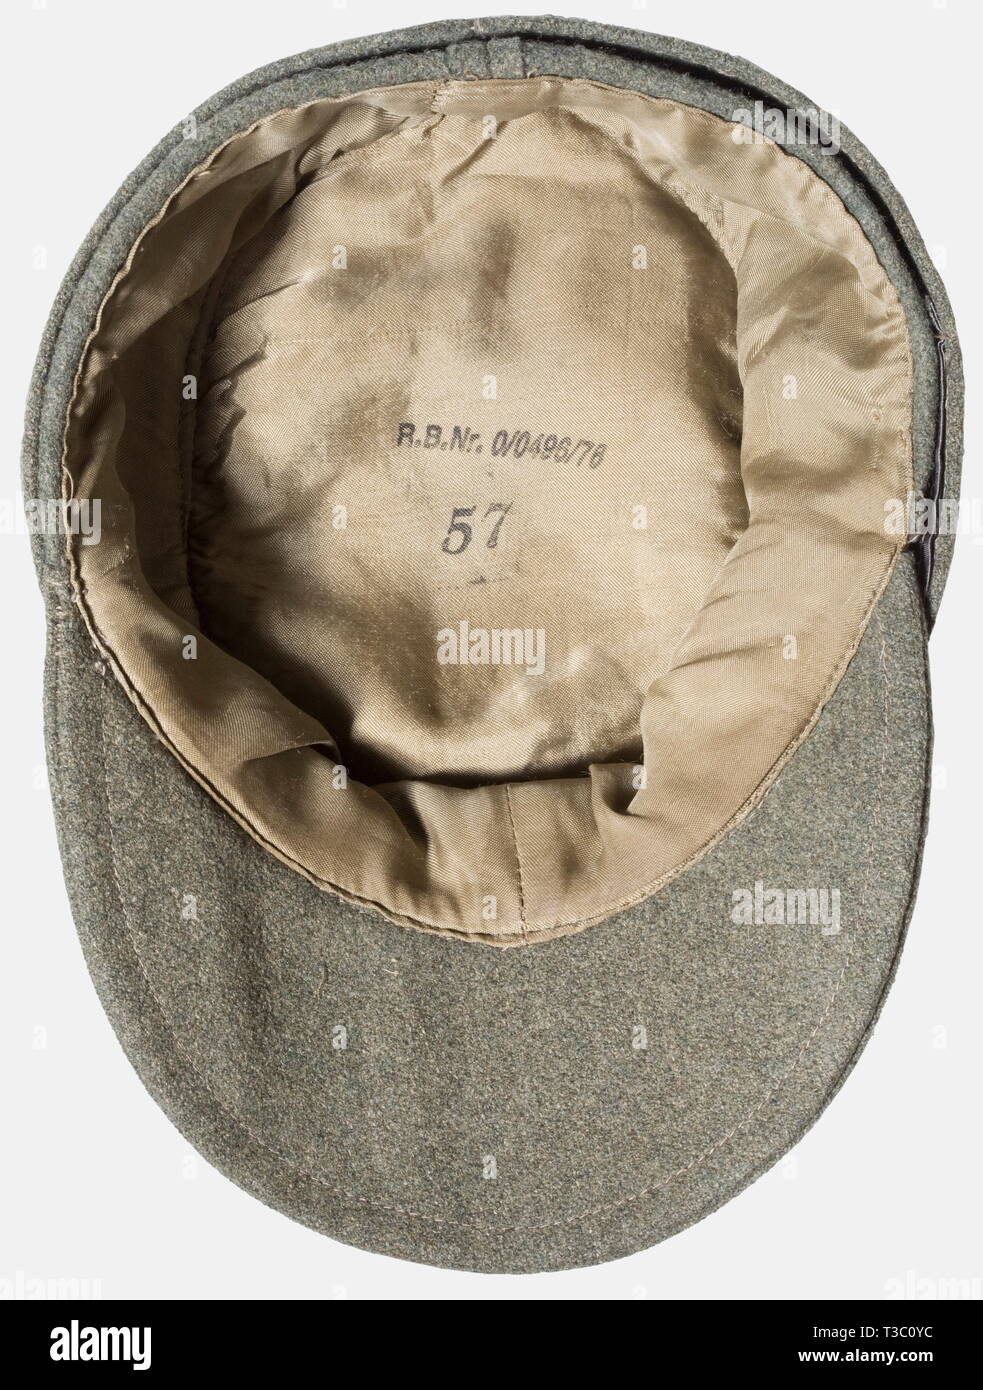 A field cap M 43 for enlisted men/NCOs, of the Mountain Troops Supply room item of field grey woolen material with a field grey lacquered button, machine-embroidered Edelweiß, trapeziform BeVo issue eagle. RBN and size stamp '57' in the artificial silk liner. historic, historical, 1930s, 20th century, Waffen-SS, armed division of the SS, armed service, armed services, NS, National Socialism, Nazism, Third Reich, German Reich, Germany, military, militaria, utensil, piece of equipment, utensils, object, objects, stills, clipping, clippings, cut out, cut-out, cut-outs, fascism, Editorial-Use-Only Stock Photo